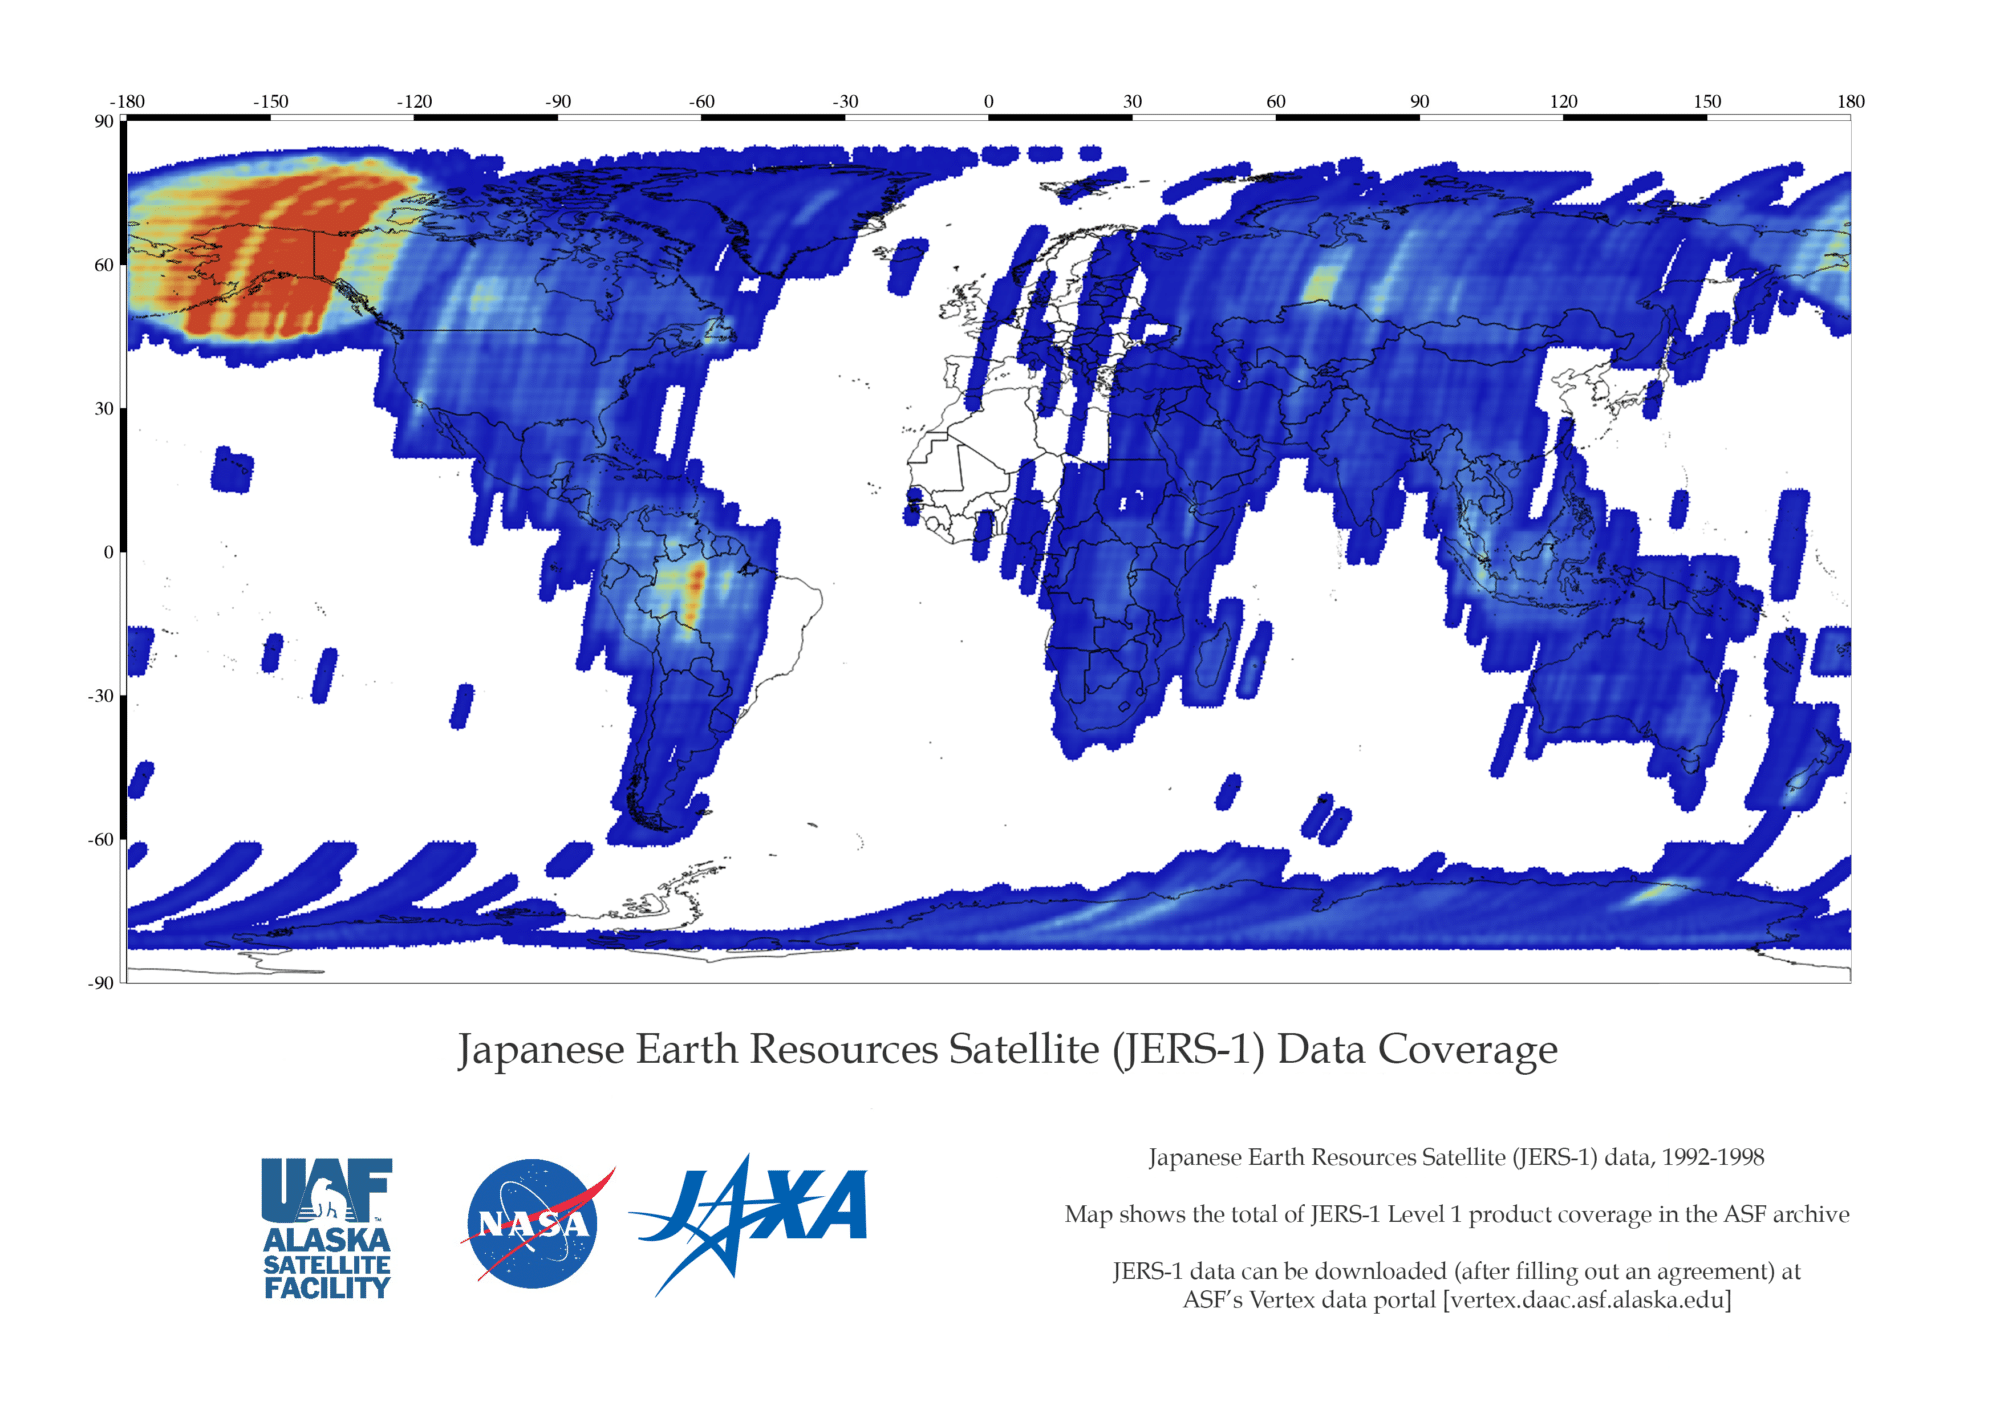 Coverage map showing JERS-1 data in the ASF archive